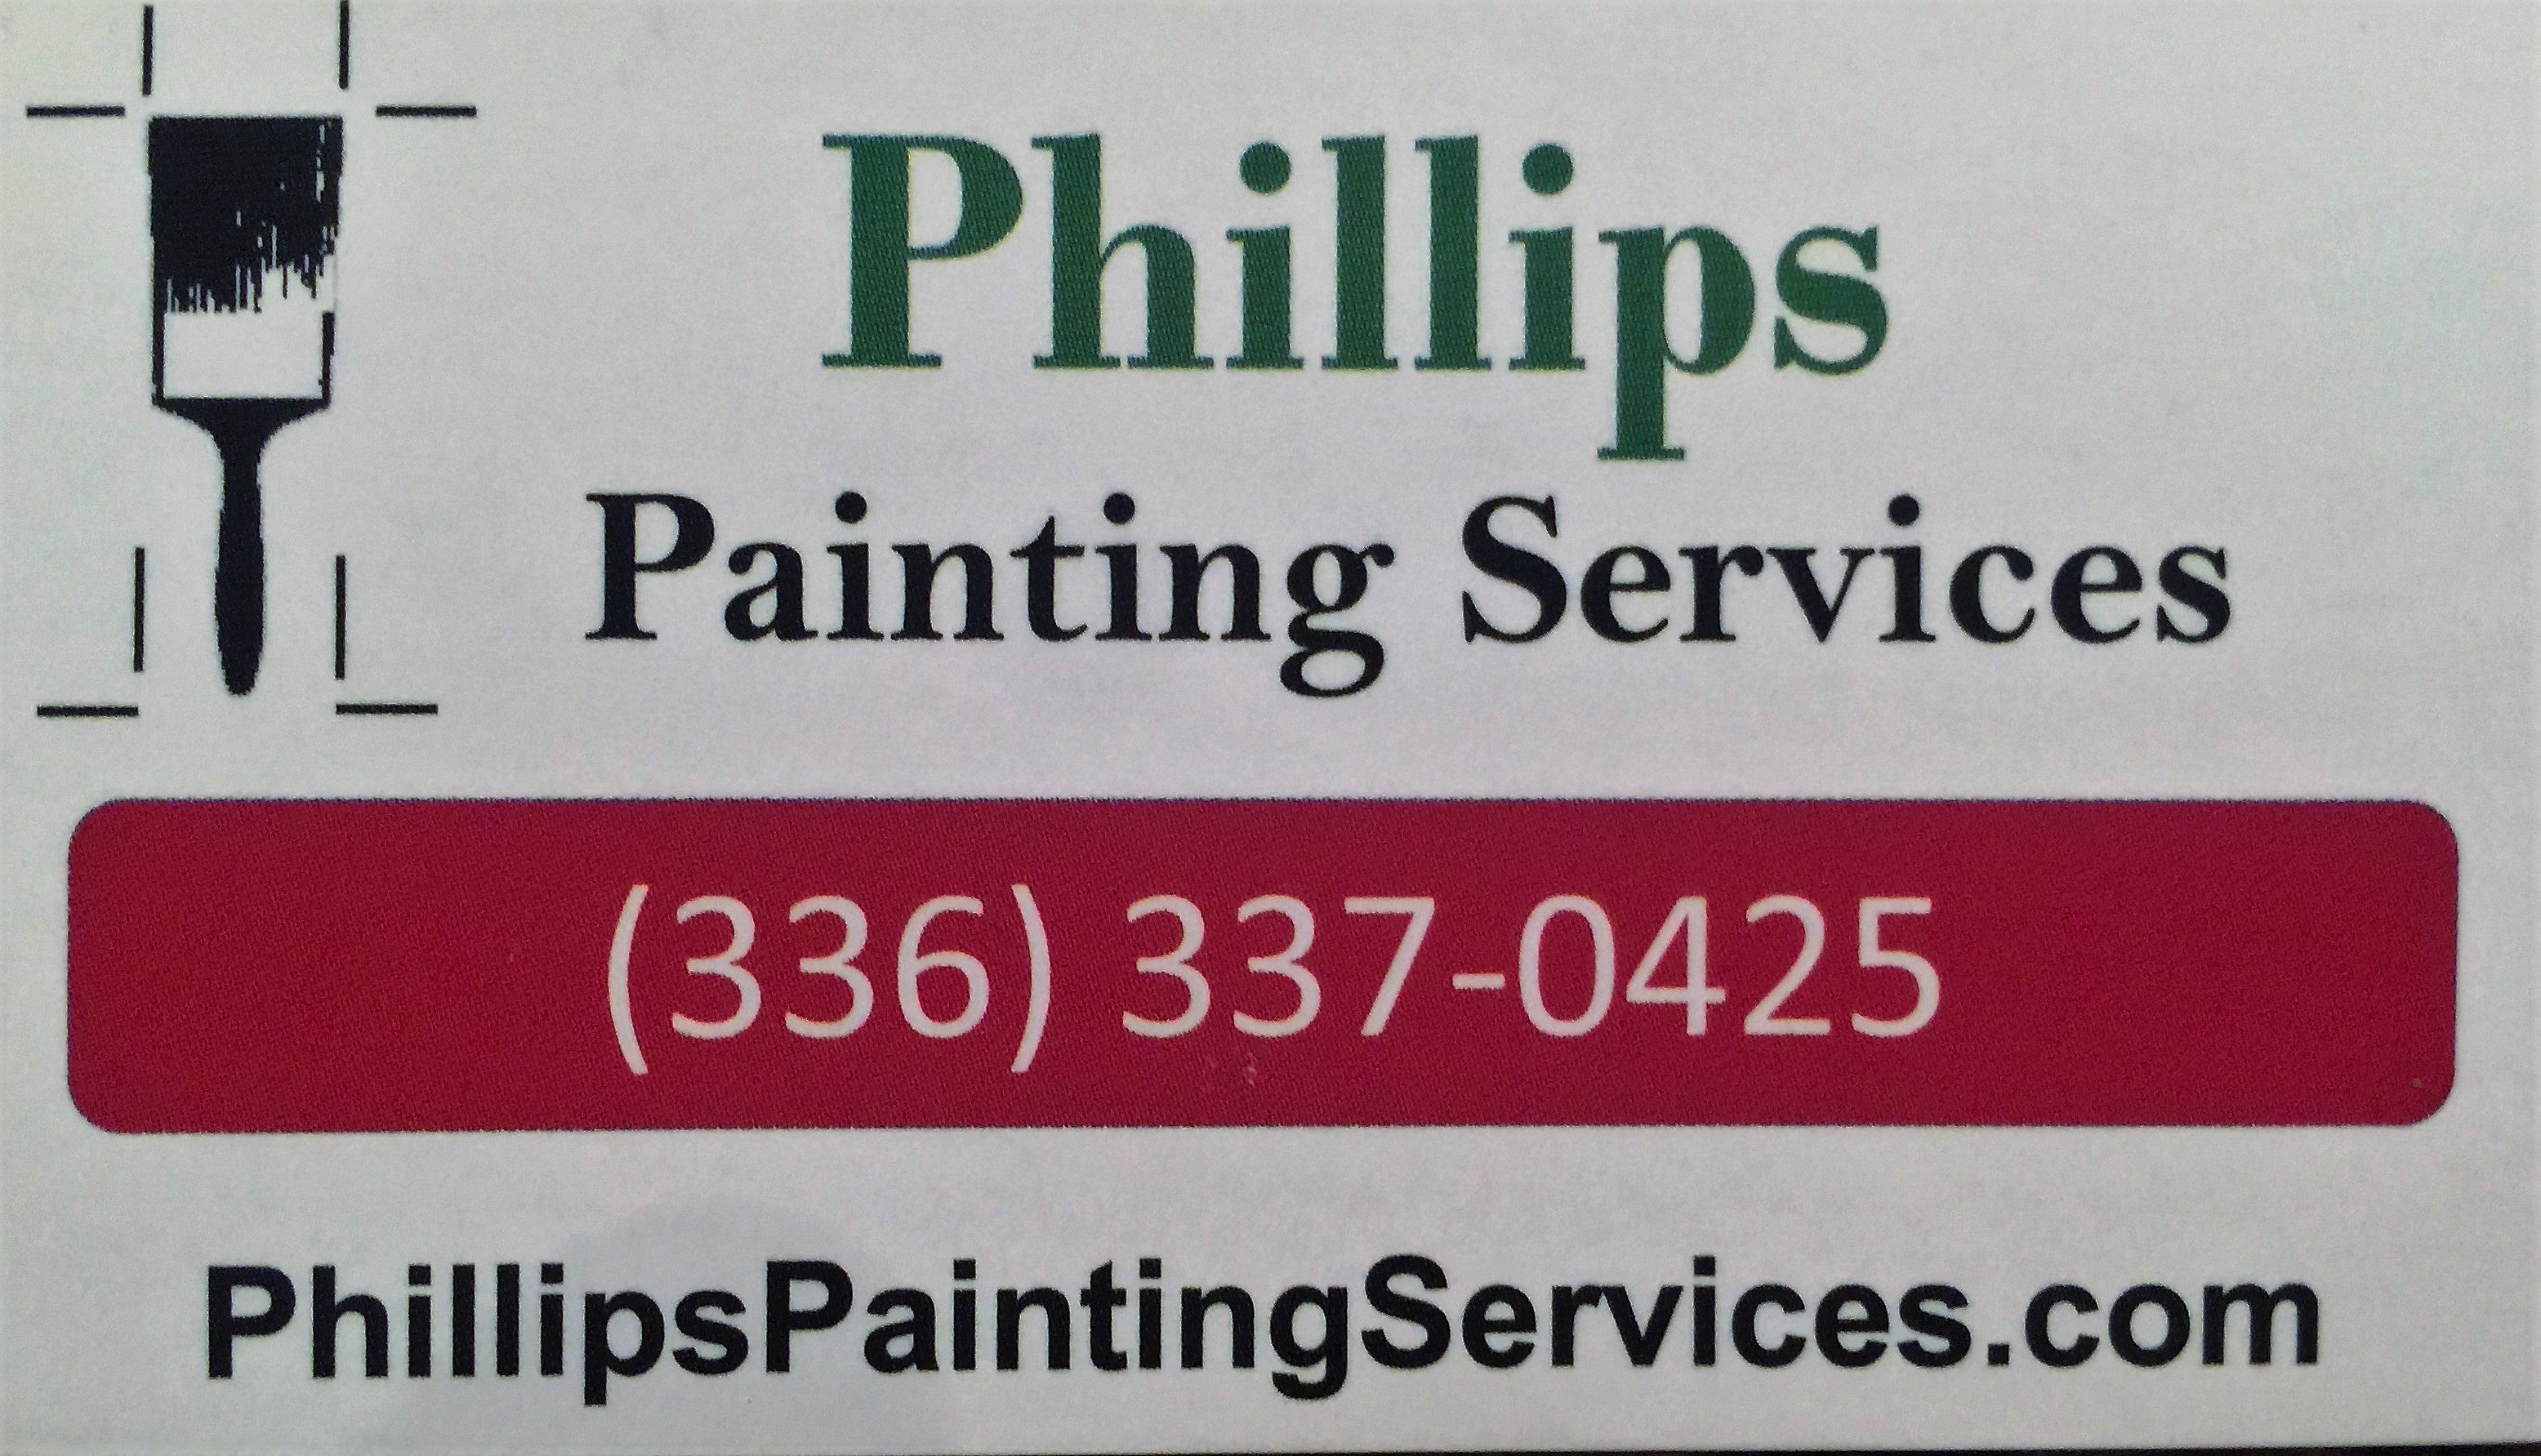 Phillips Painting Services Logo